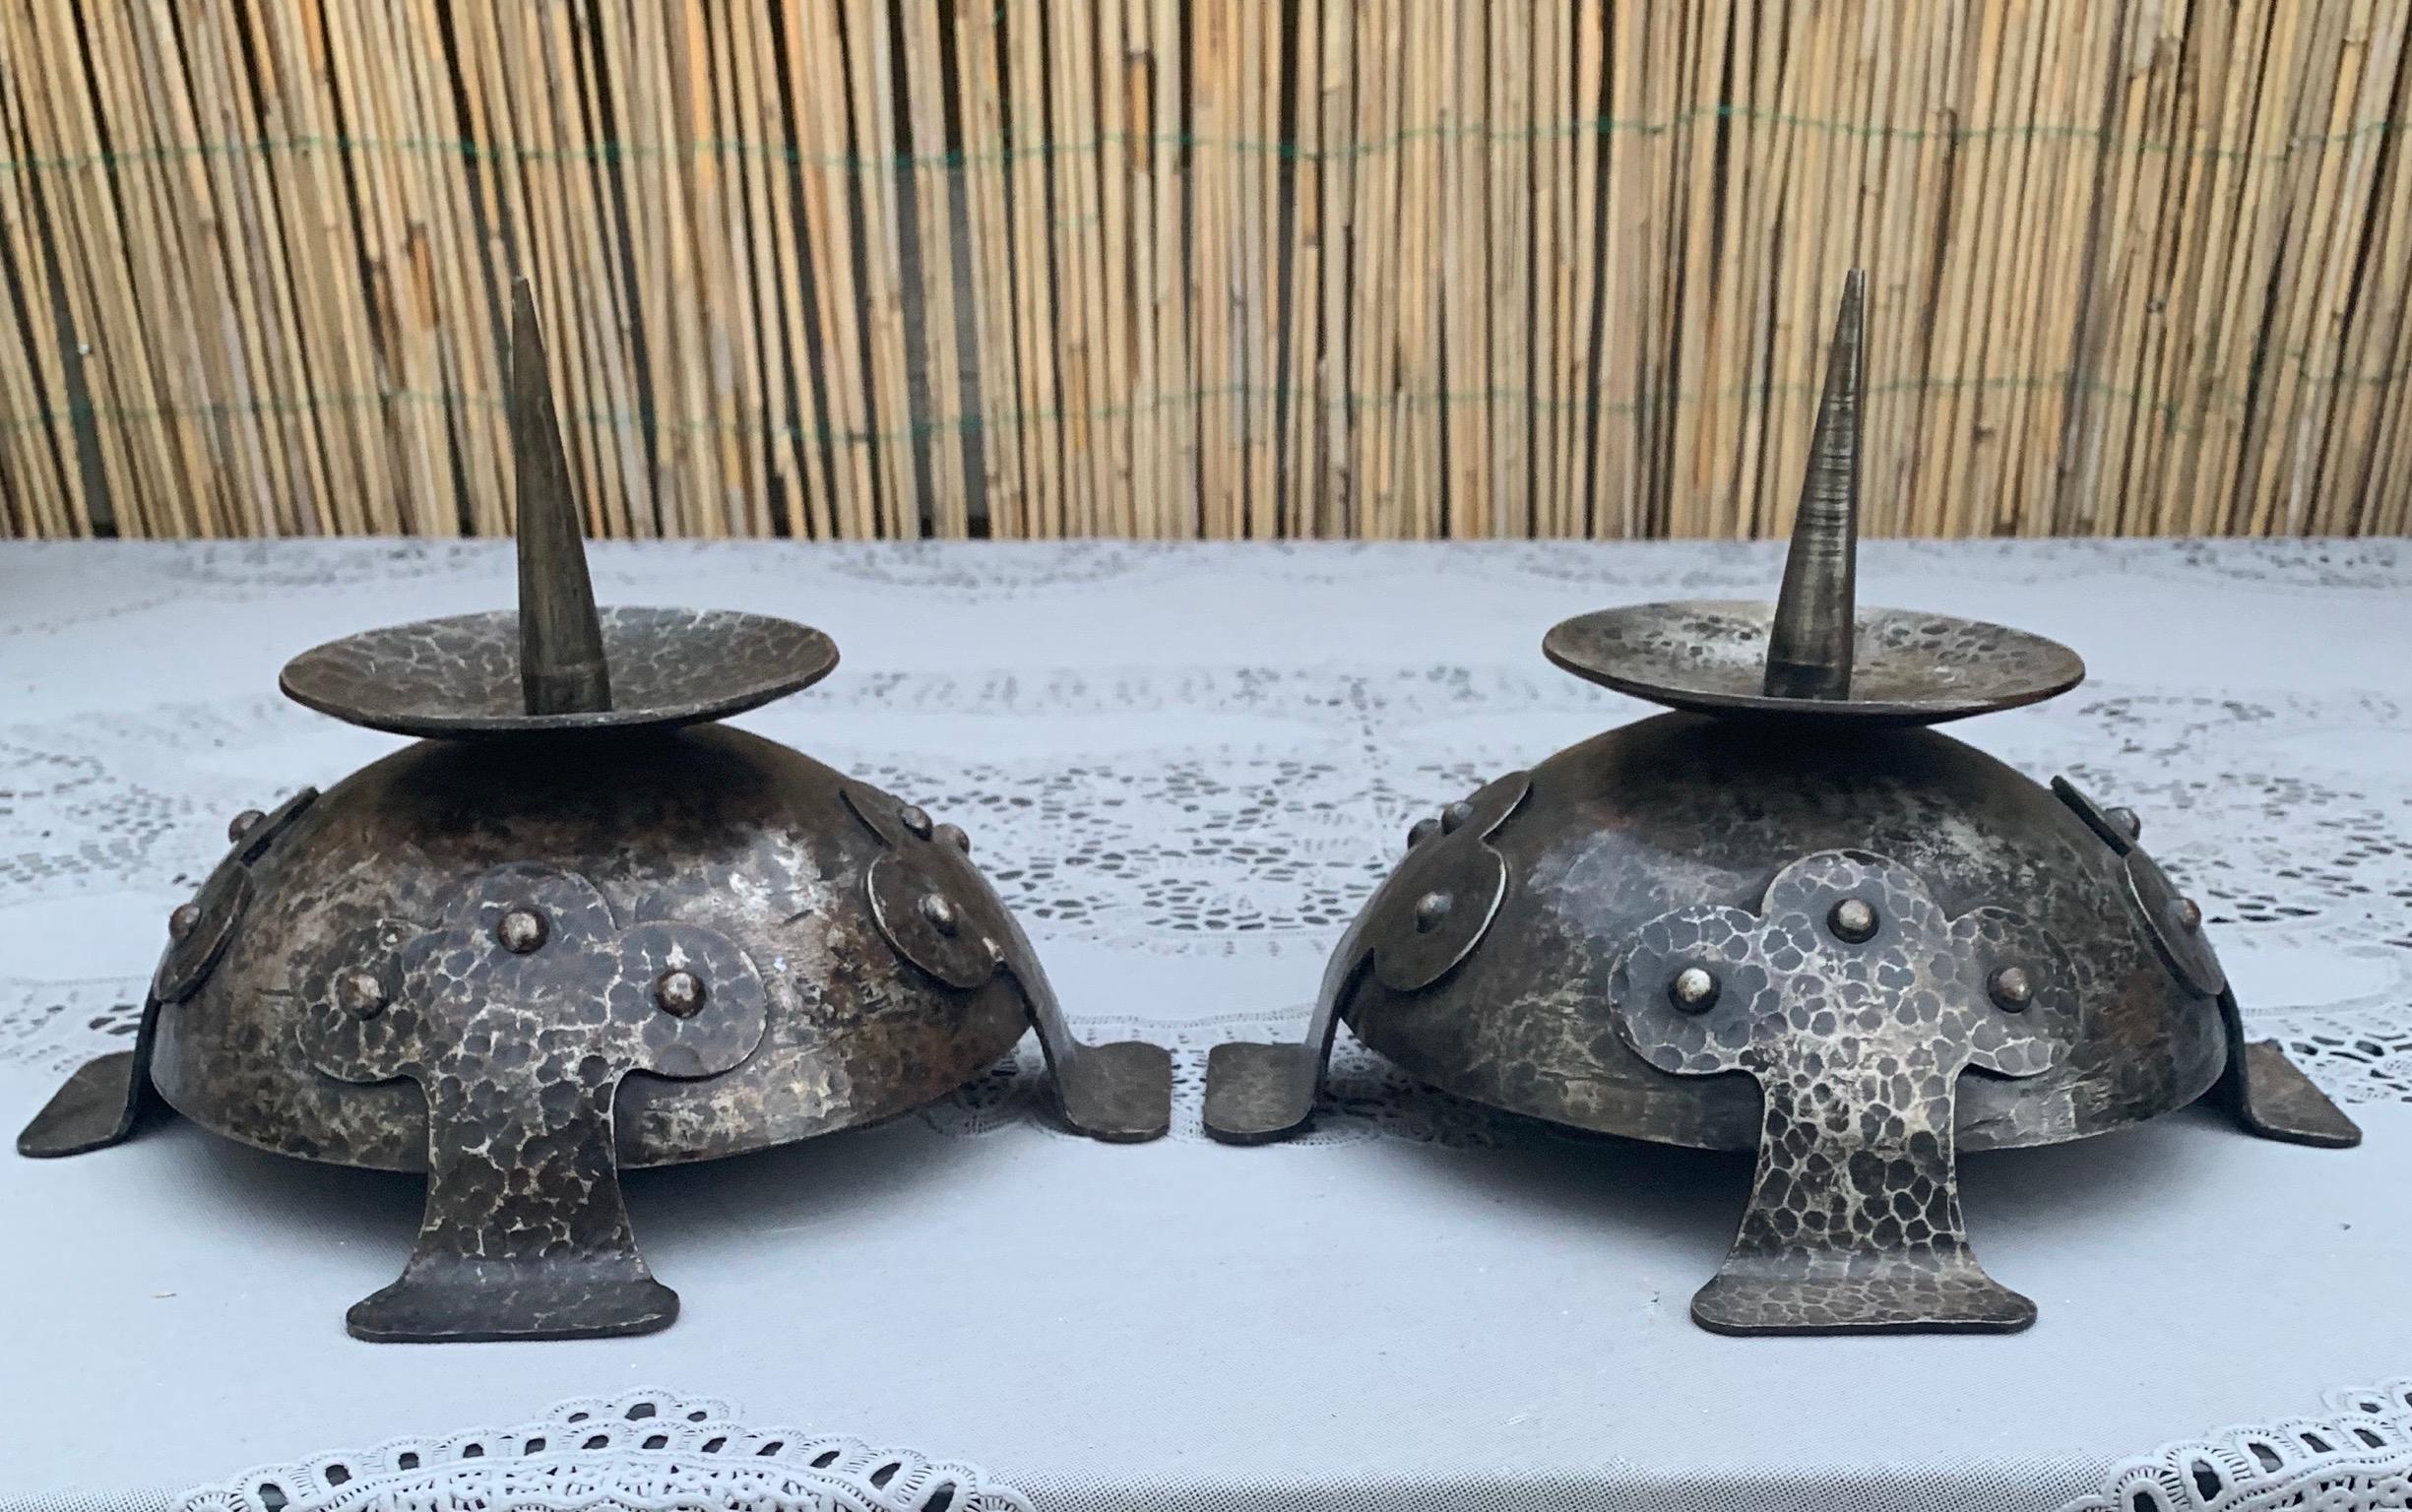 Beautiful and very stylish pair of Gothic candlesticks made in the Arts and Crafts era.

If you are looking for rare and good quality antiques in the Gothic style to grace your living space then this hand forged and timeless pair could be yours to